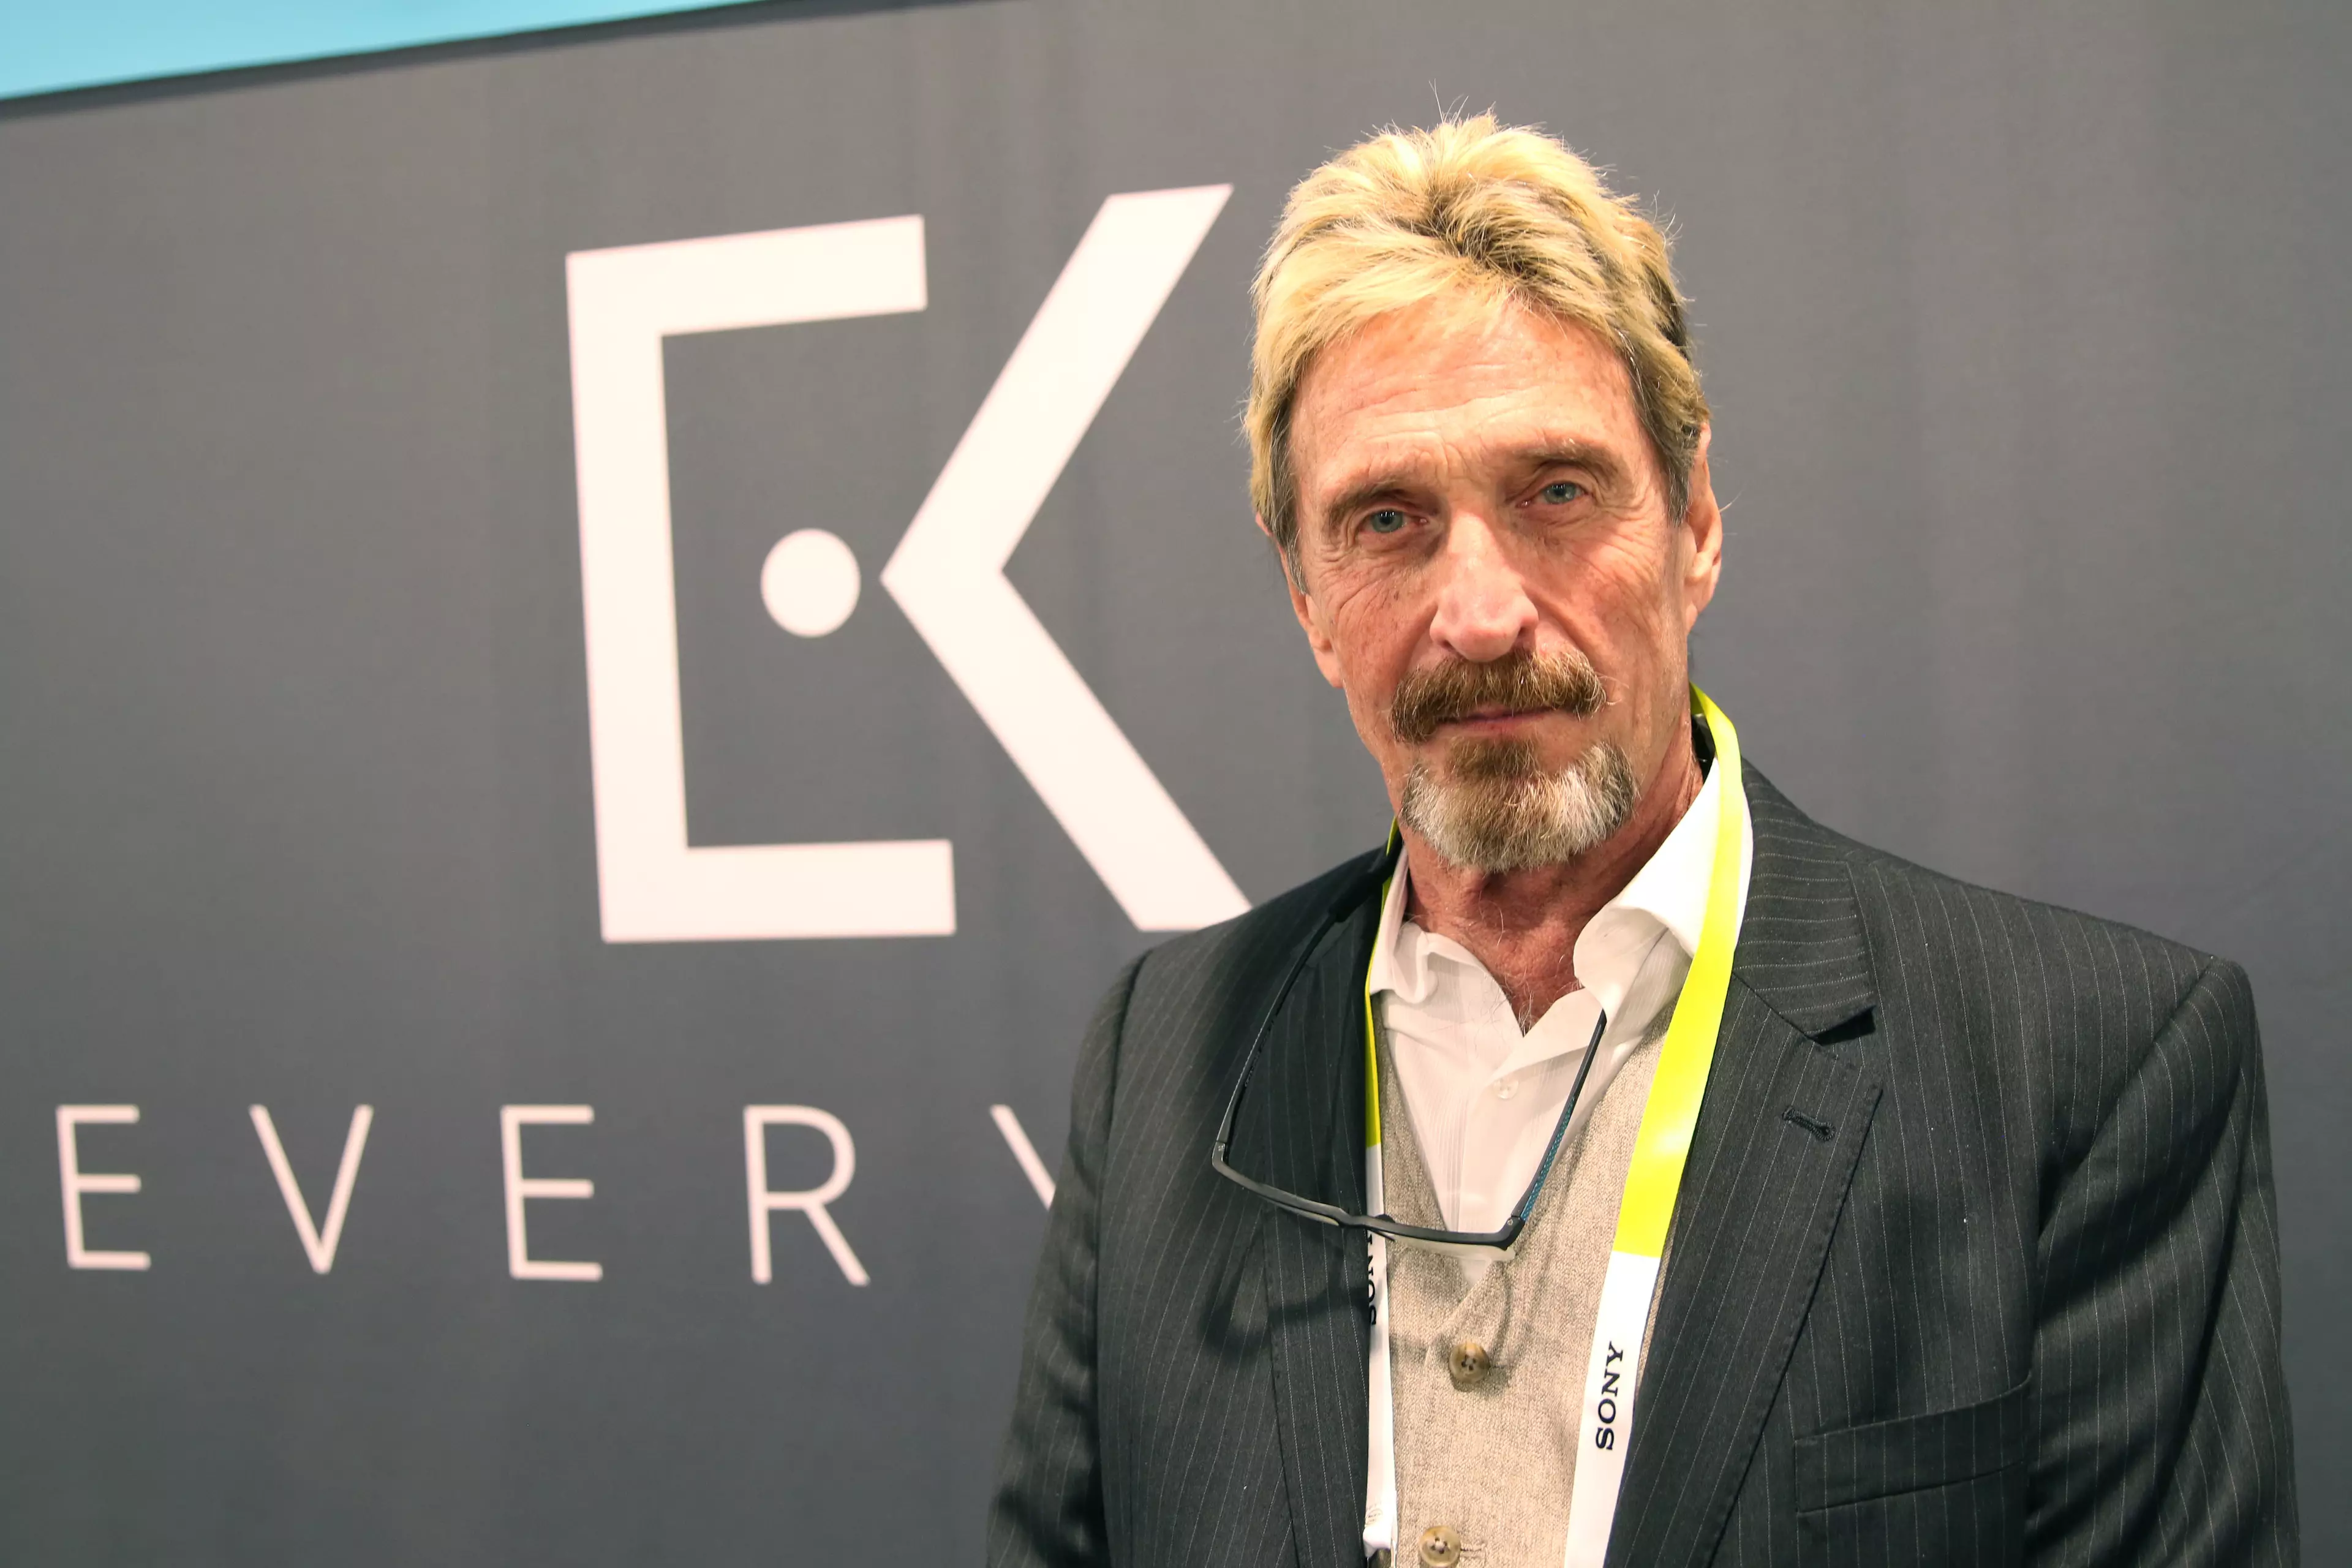 Software Pioneer John McAfee Claims He Was 'Poisoned' By 'Incompetent Enemies'